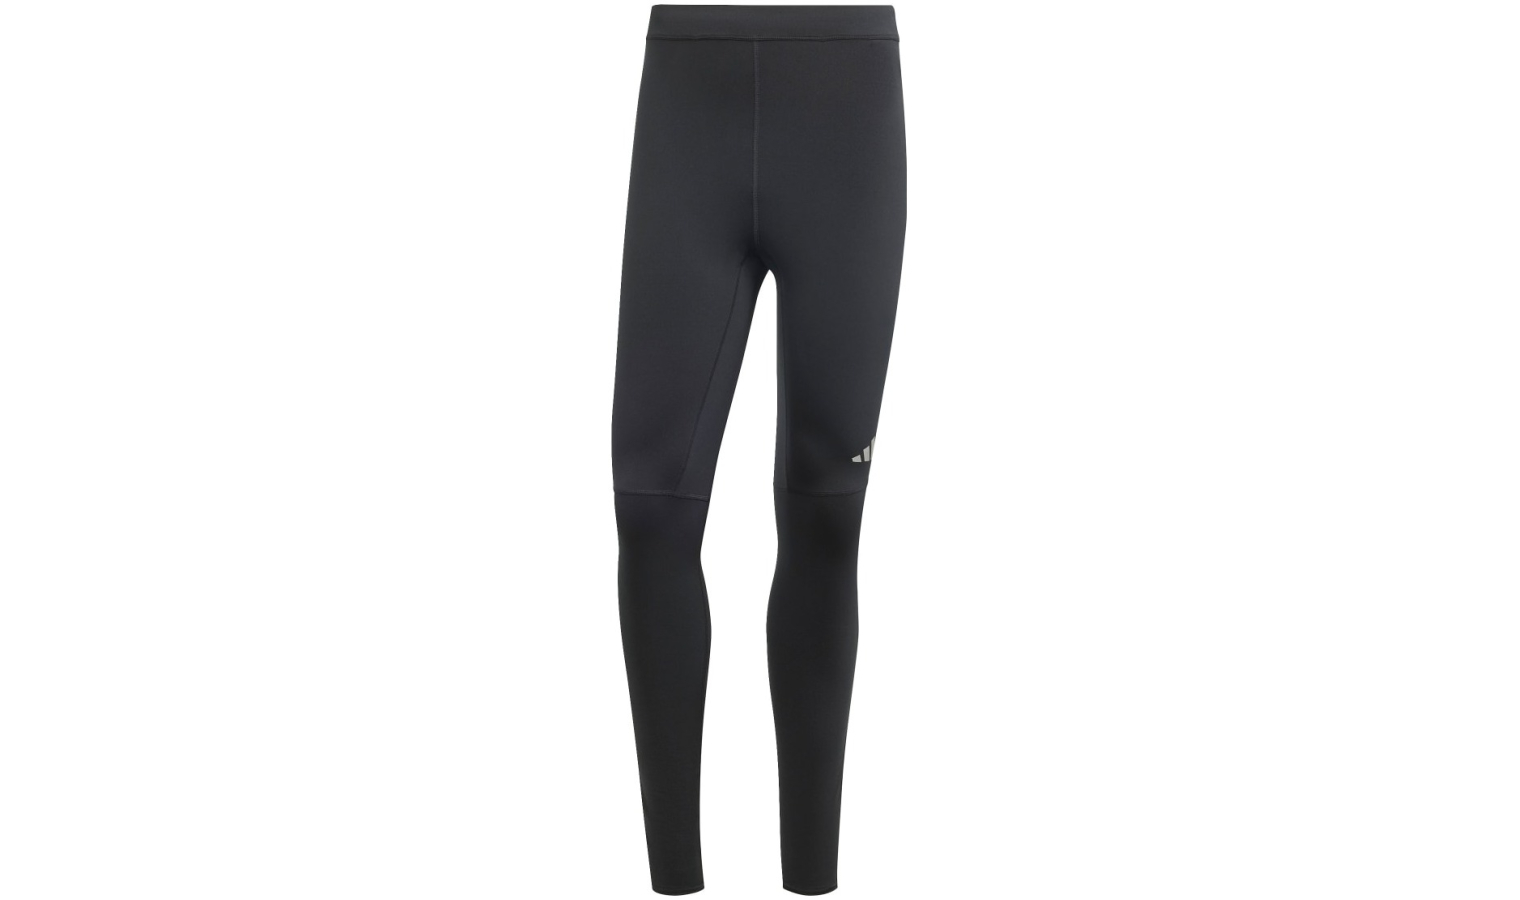 Mens compression 7/8 leggings Under Armour UA HG ISOCHILL PERF